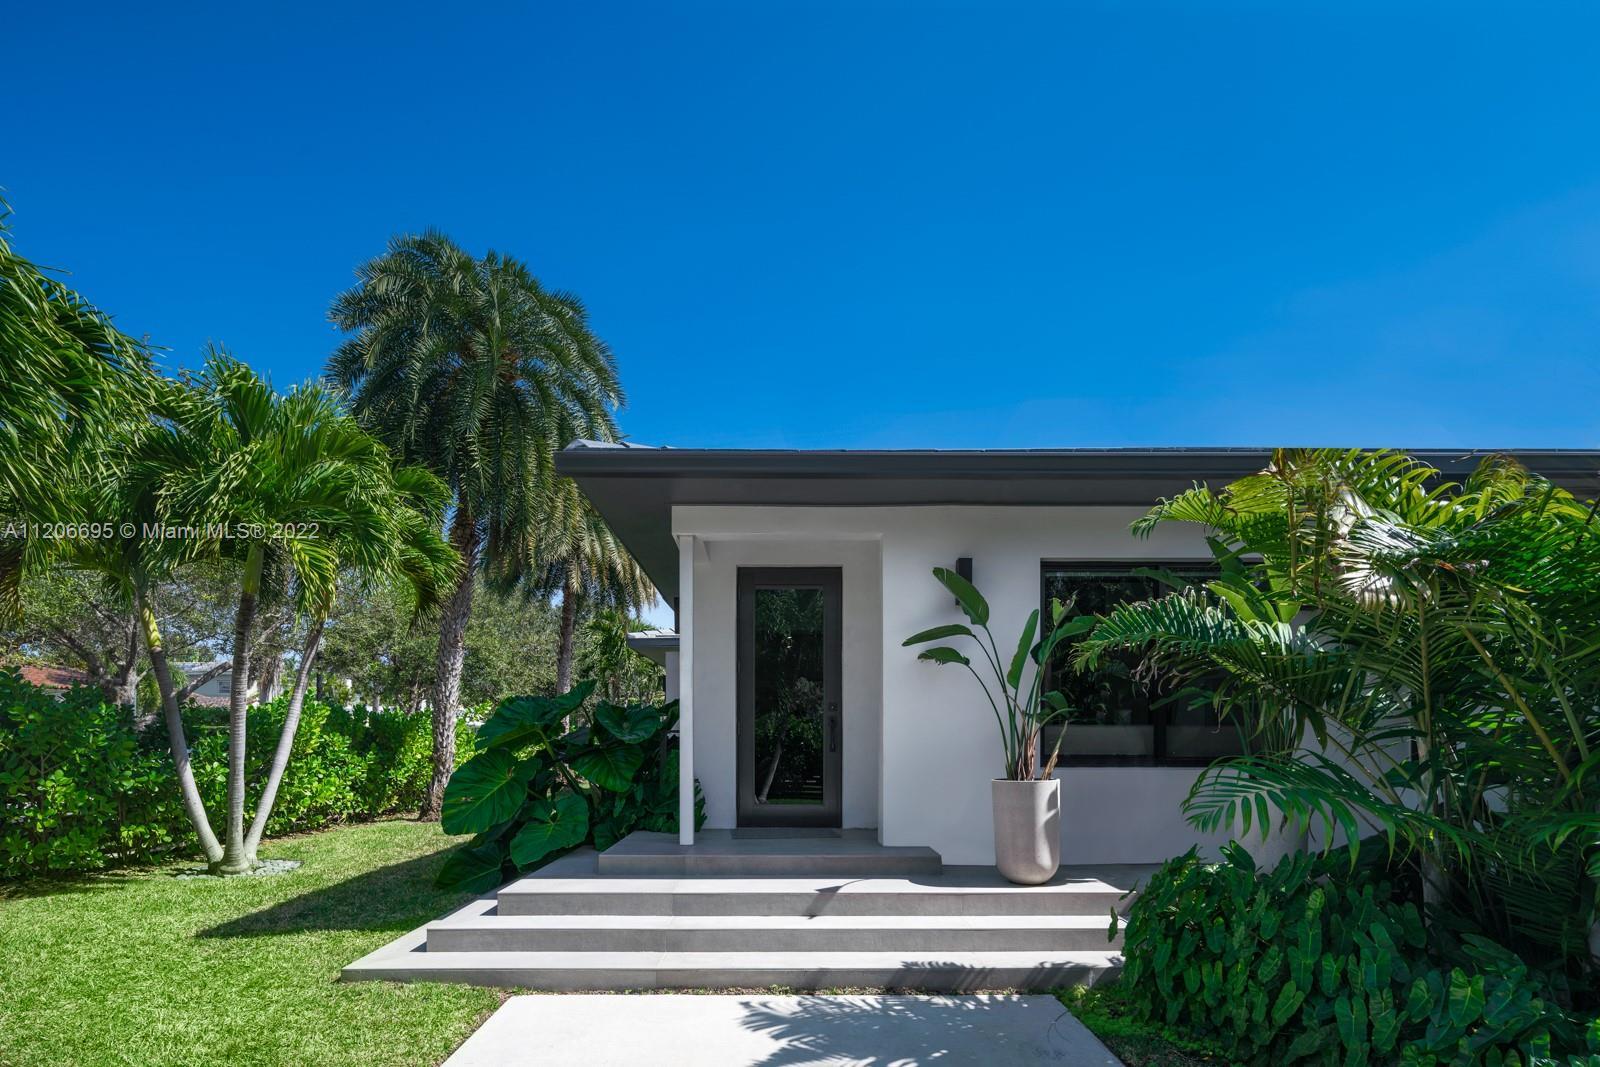 St Barths style designer finished newly renovated home of approx 3,000sf within the highly desirable